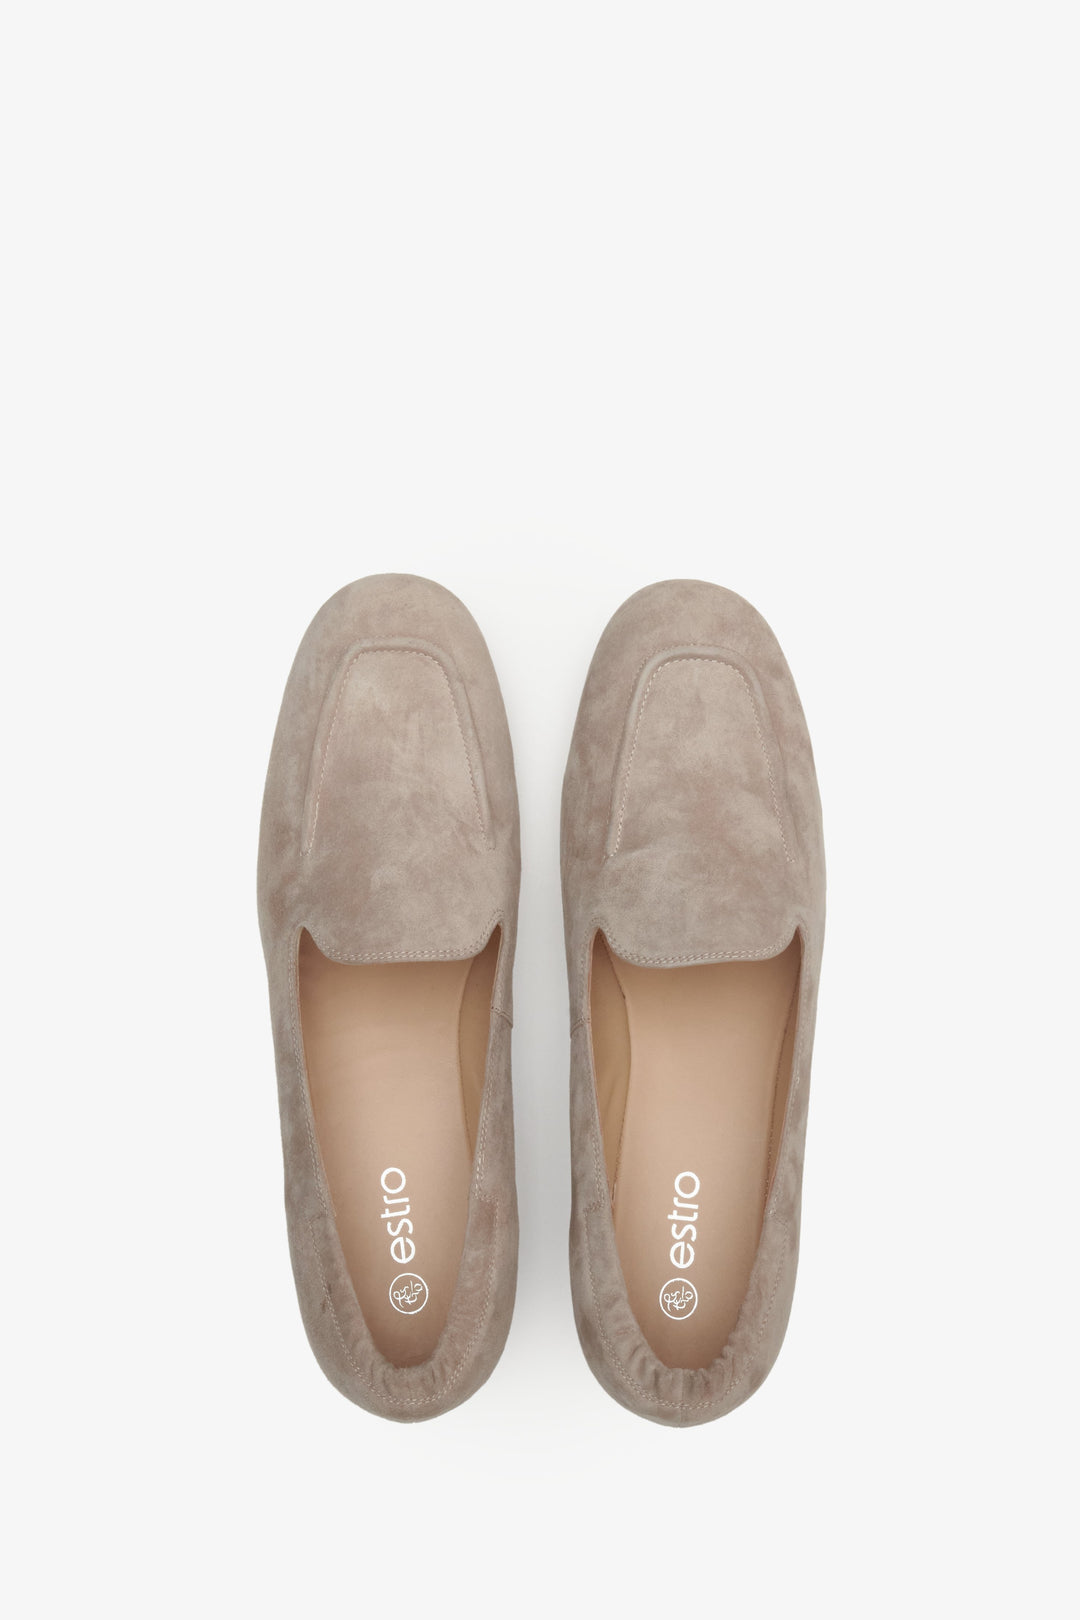 Women's beige Estro moccasins for fall, made of genuine velour - presentation of footwear from above.